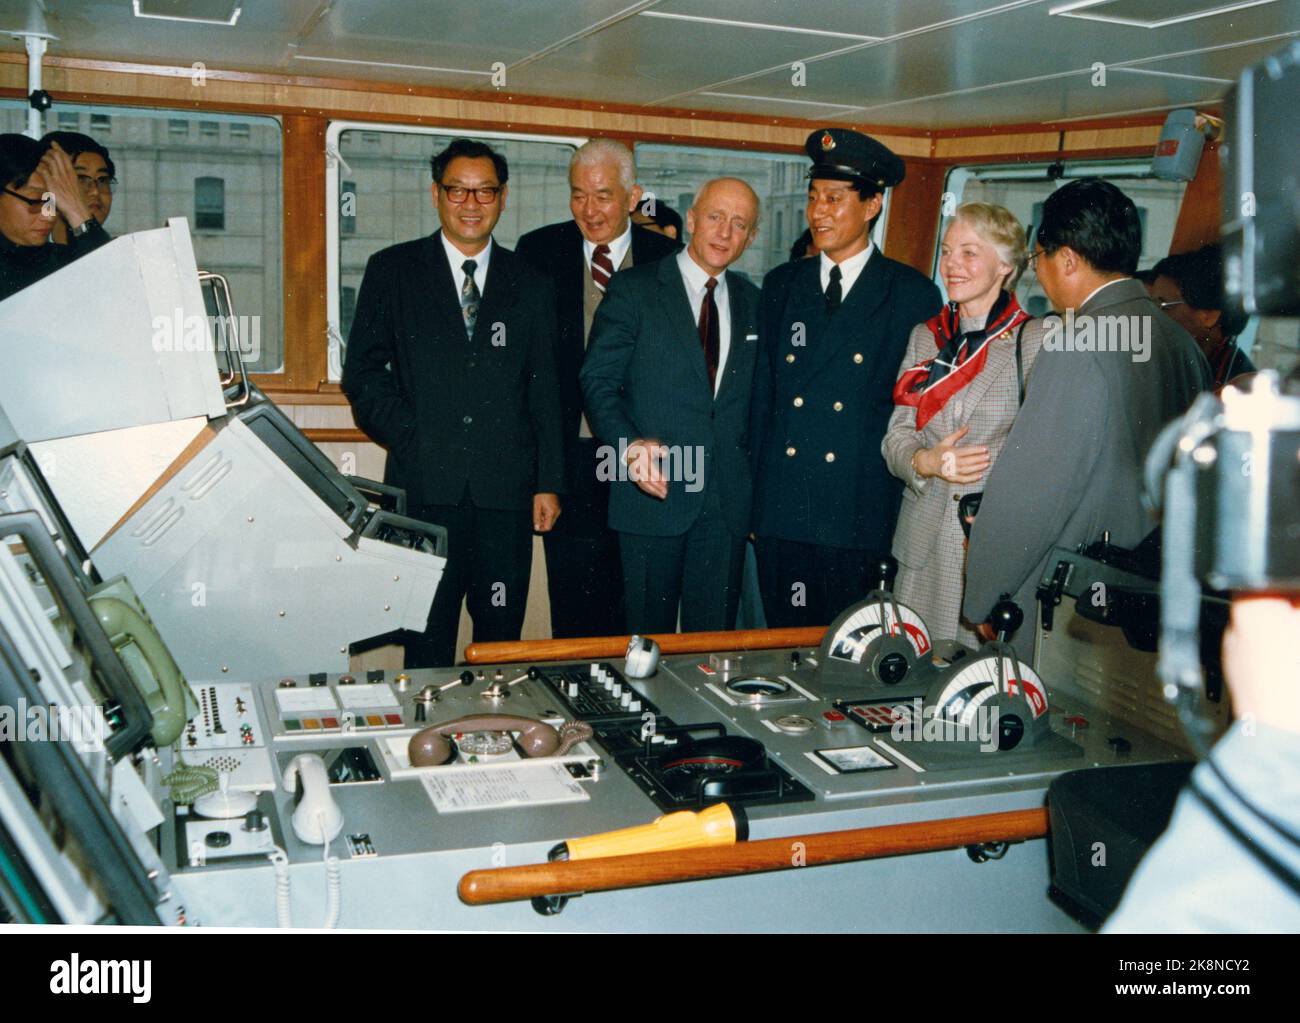 China 19841204: Prime Minister Kåre Willoch on official visit to China. Here Willoch and his wife Anne Marie visiting a fishing research vessel named Beidou. The ship was a gift to China from the Norwegian government in Shanghai November 21, 1984. Photo: Xinhua / NTB. Stock Photo